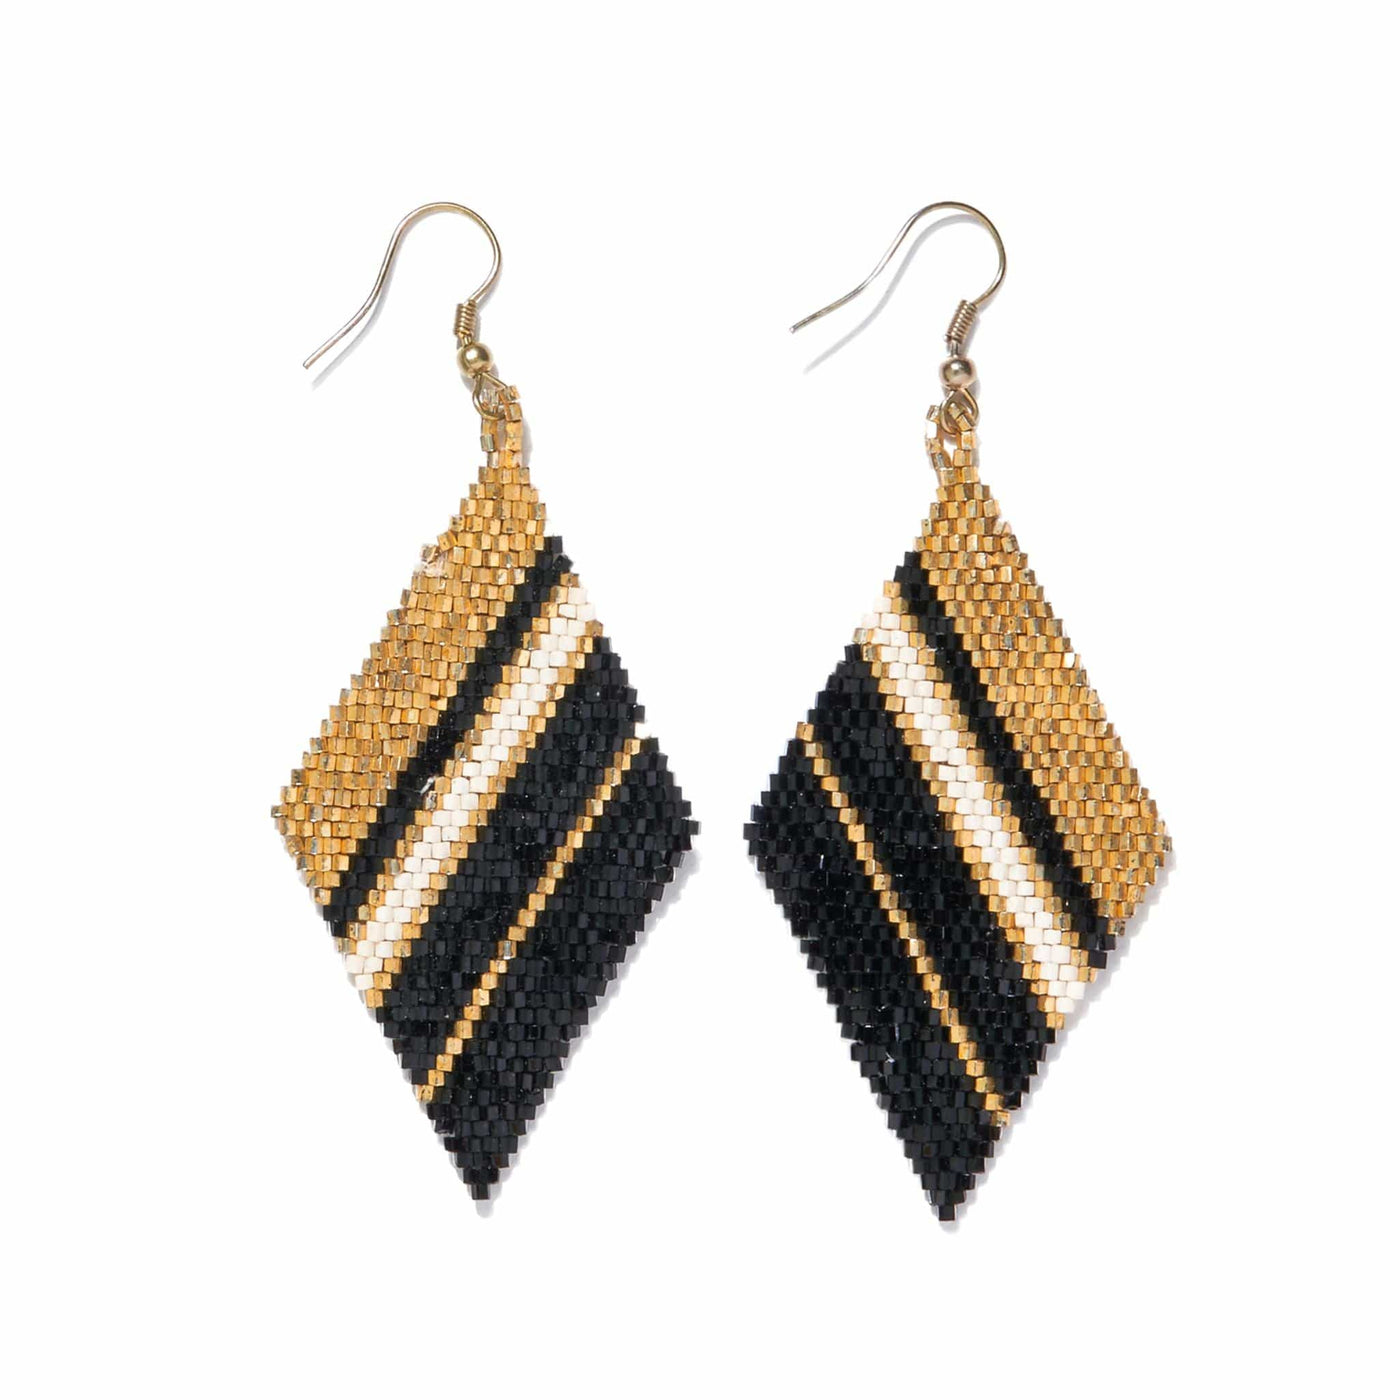 Frida Diagonal Stripe Beaded Earrings in gold, black, and ivory, front view.